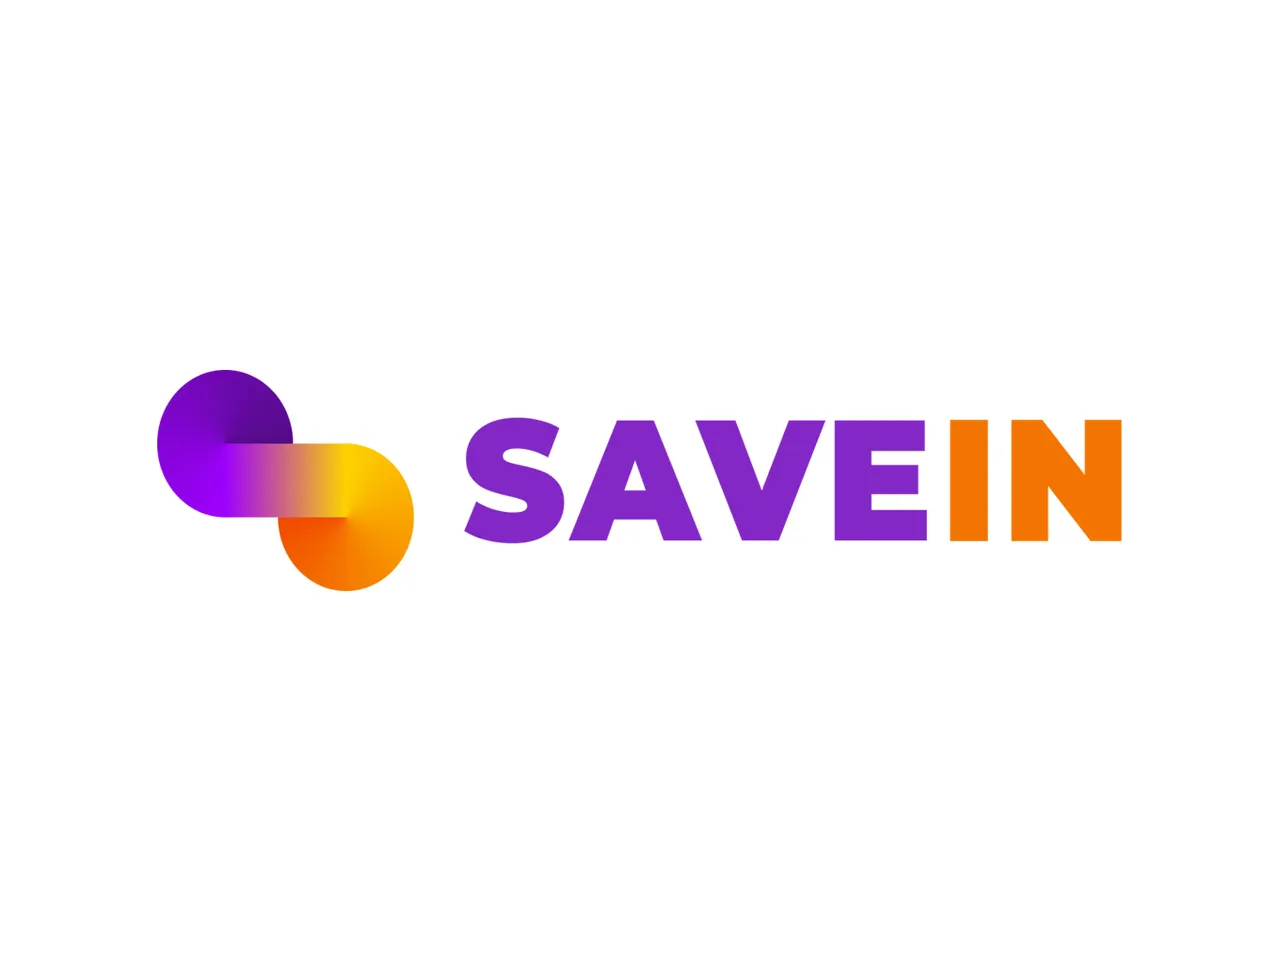 YC-backed fintech startup SaveIn raises $1.1M in funding led by Bayhouse Capital